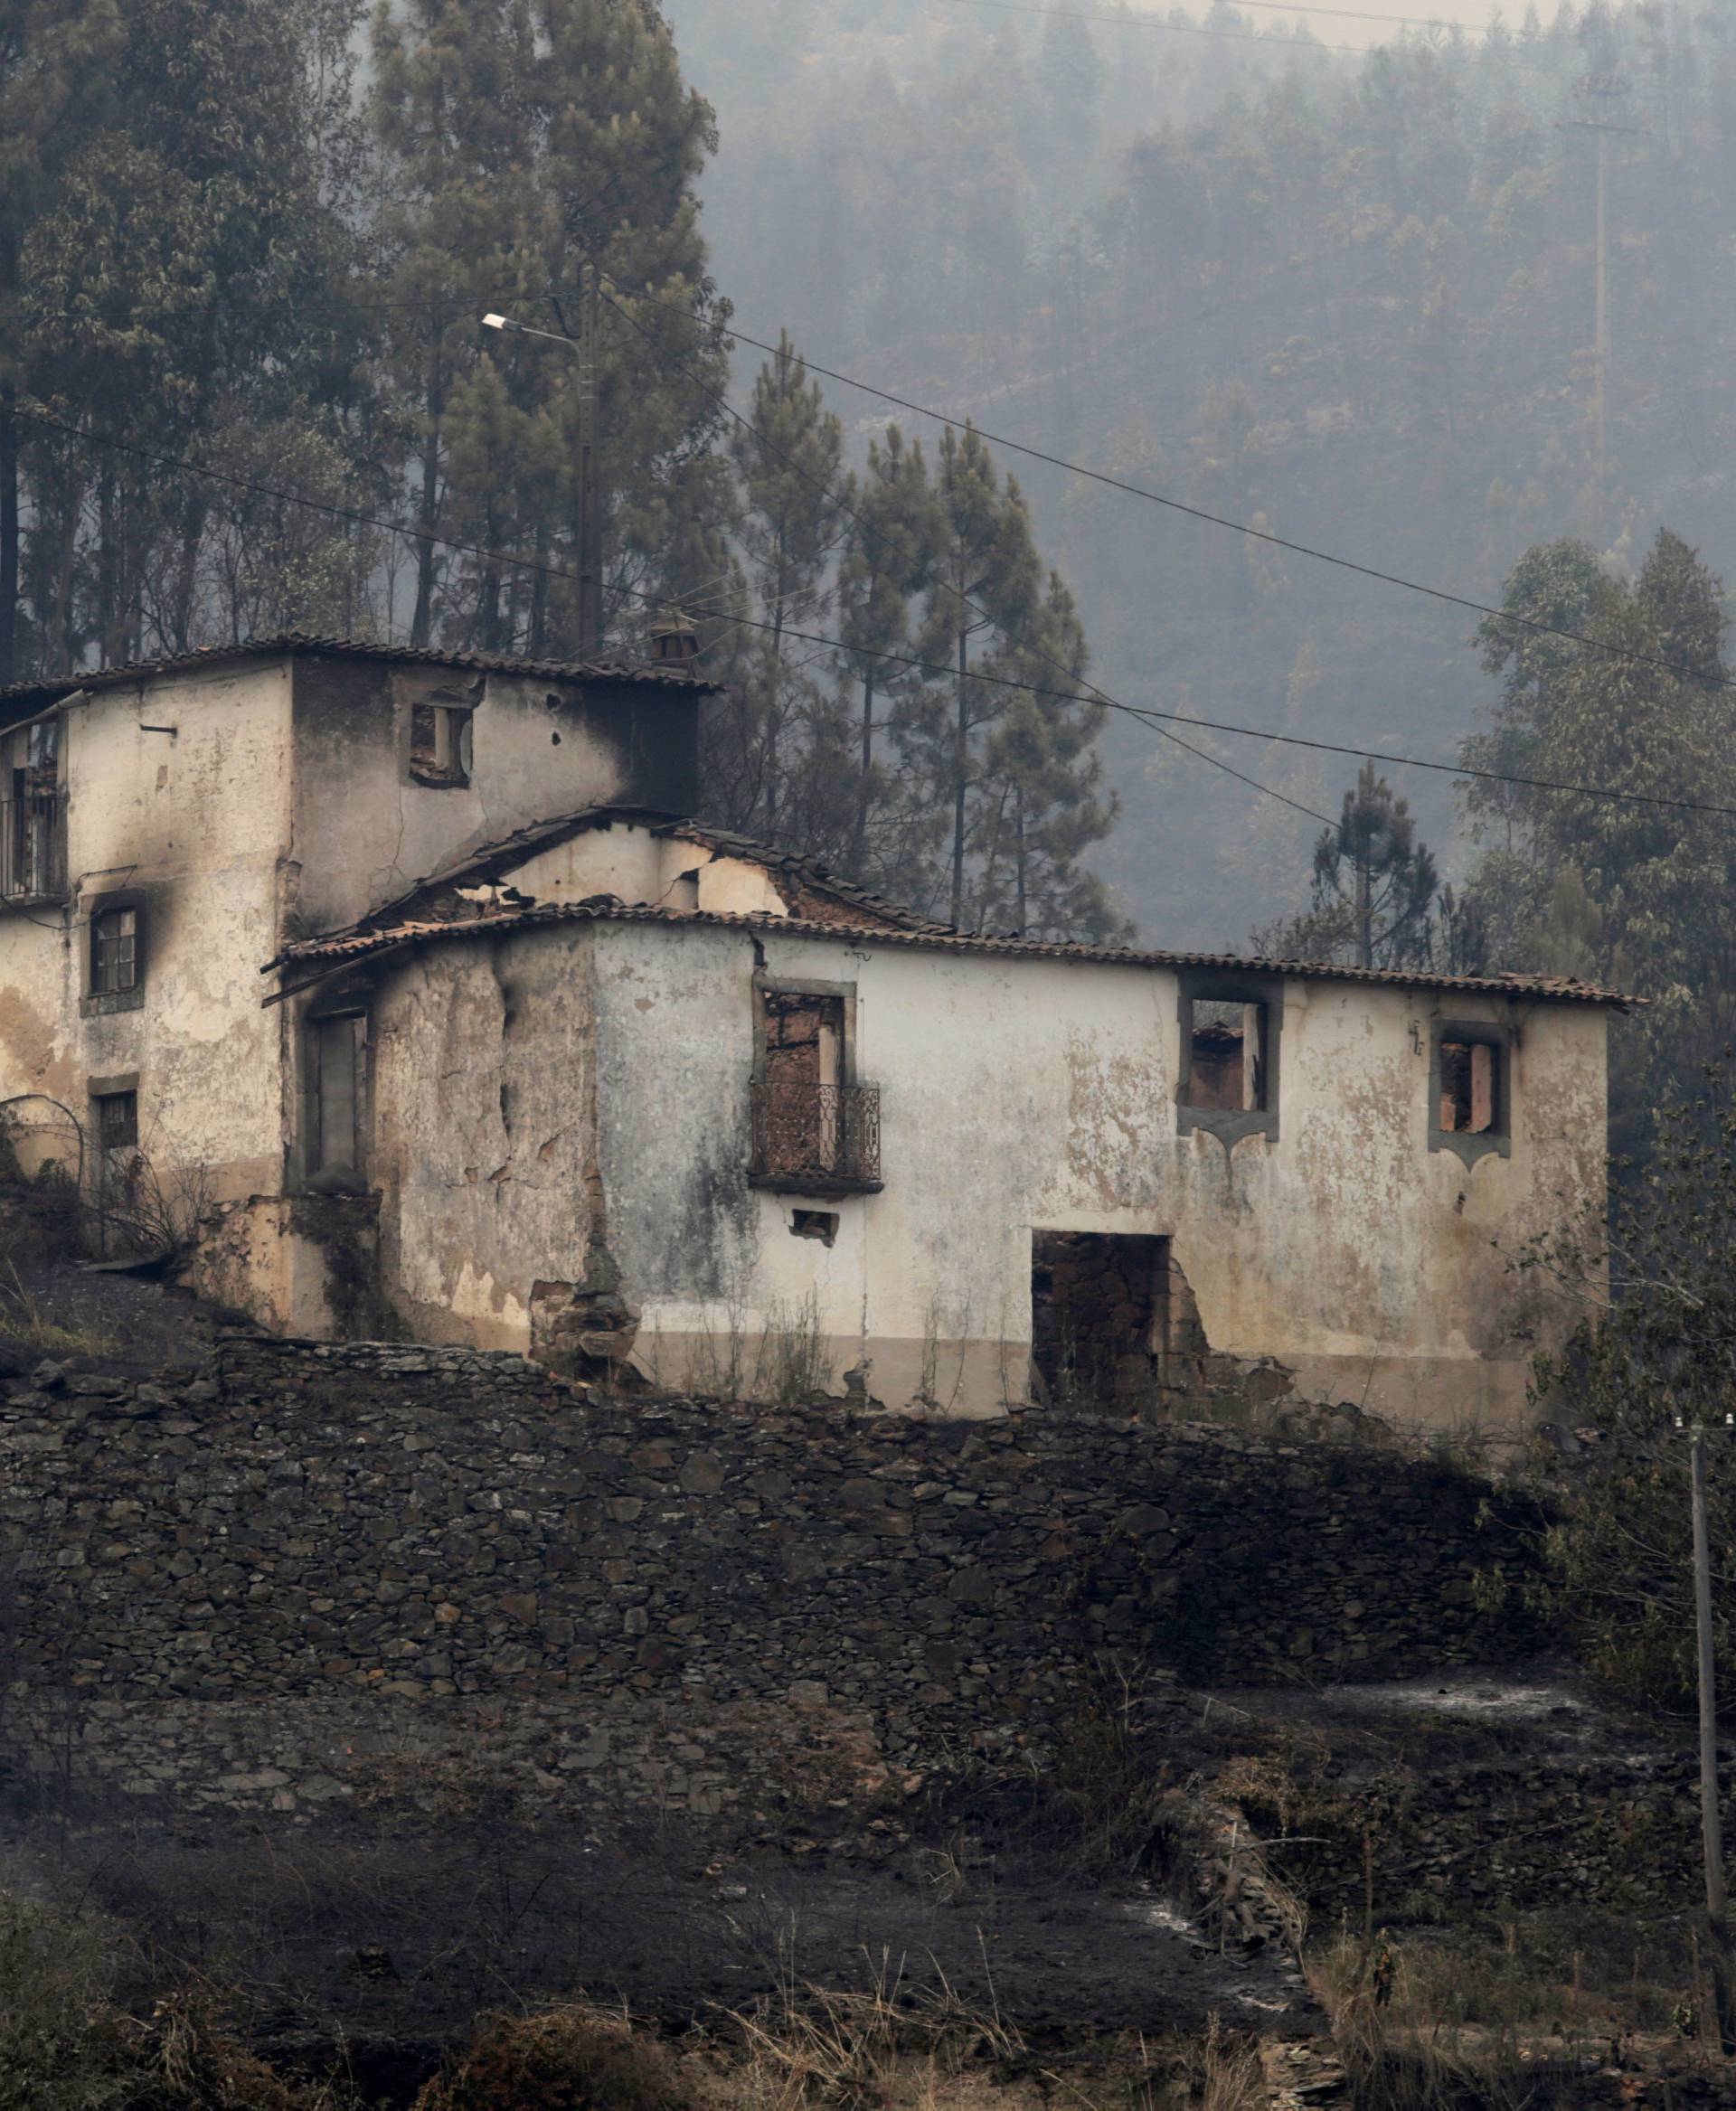 A burnt house is seen during a forest fire in Pedrogao Grande